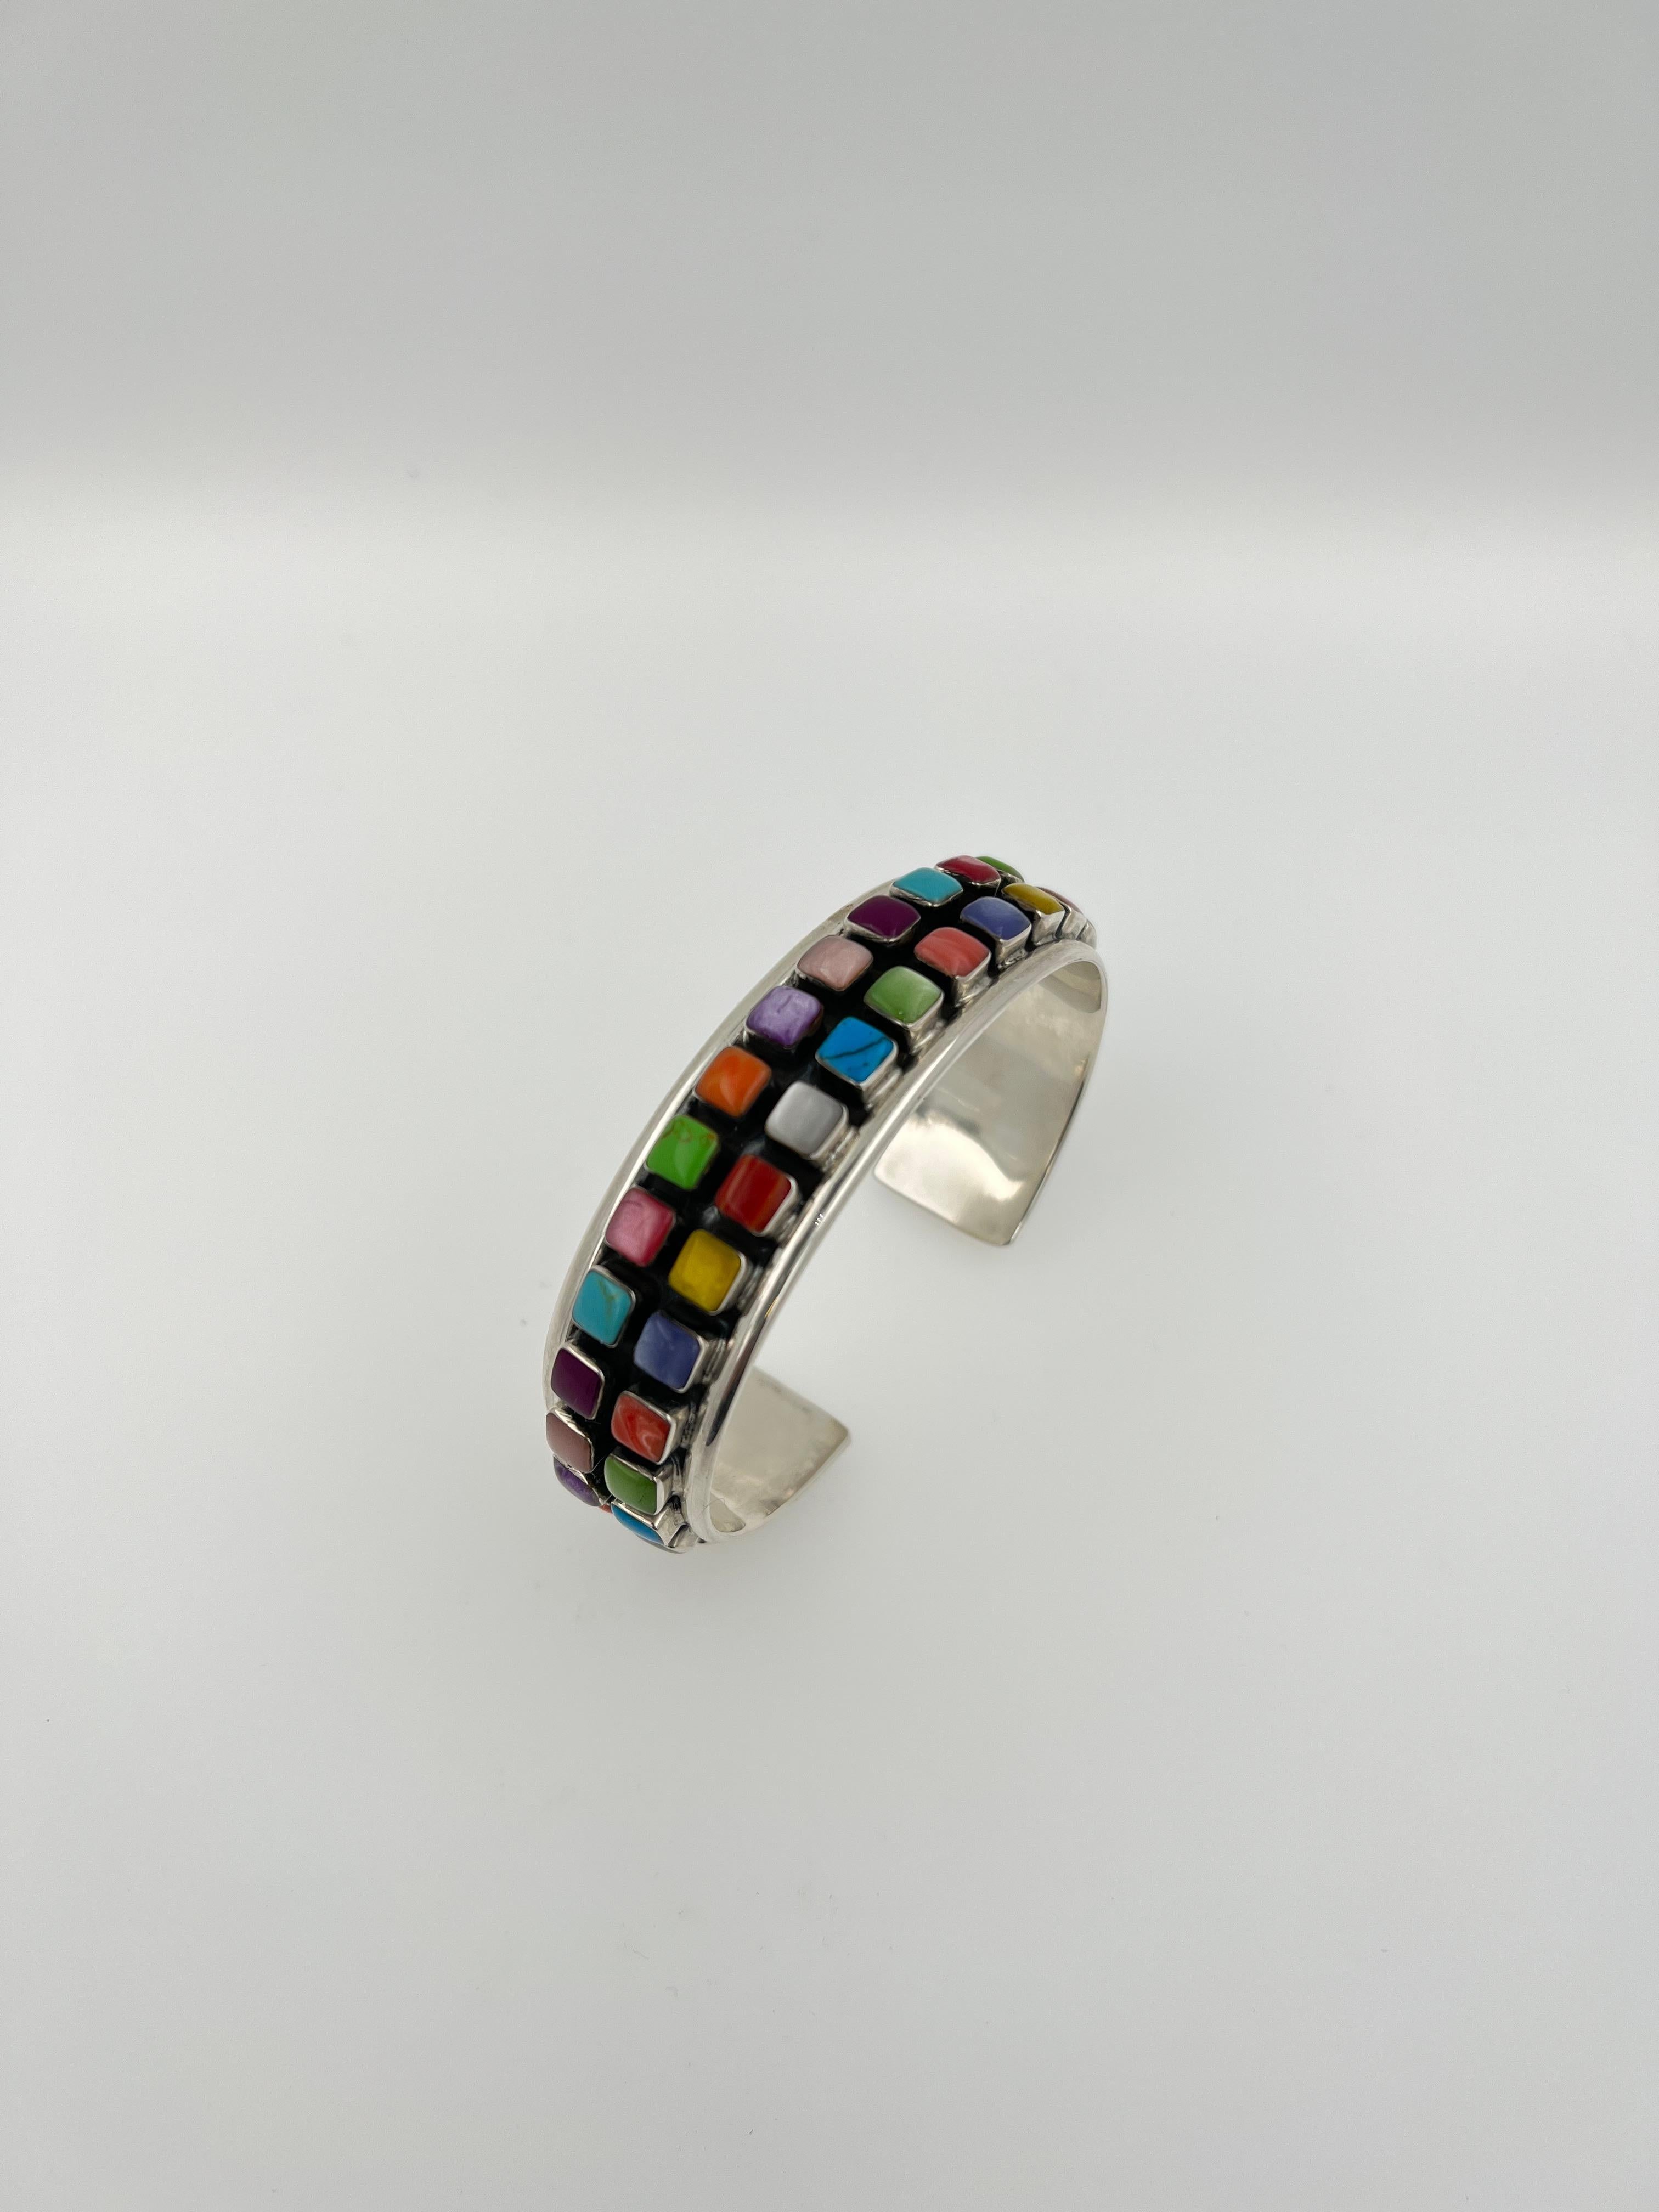 Geometric Colored Rainbow Cab Gemstone Sterling Silver Wide Cuff Bangle Bracelet For Sale 6